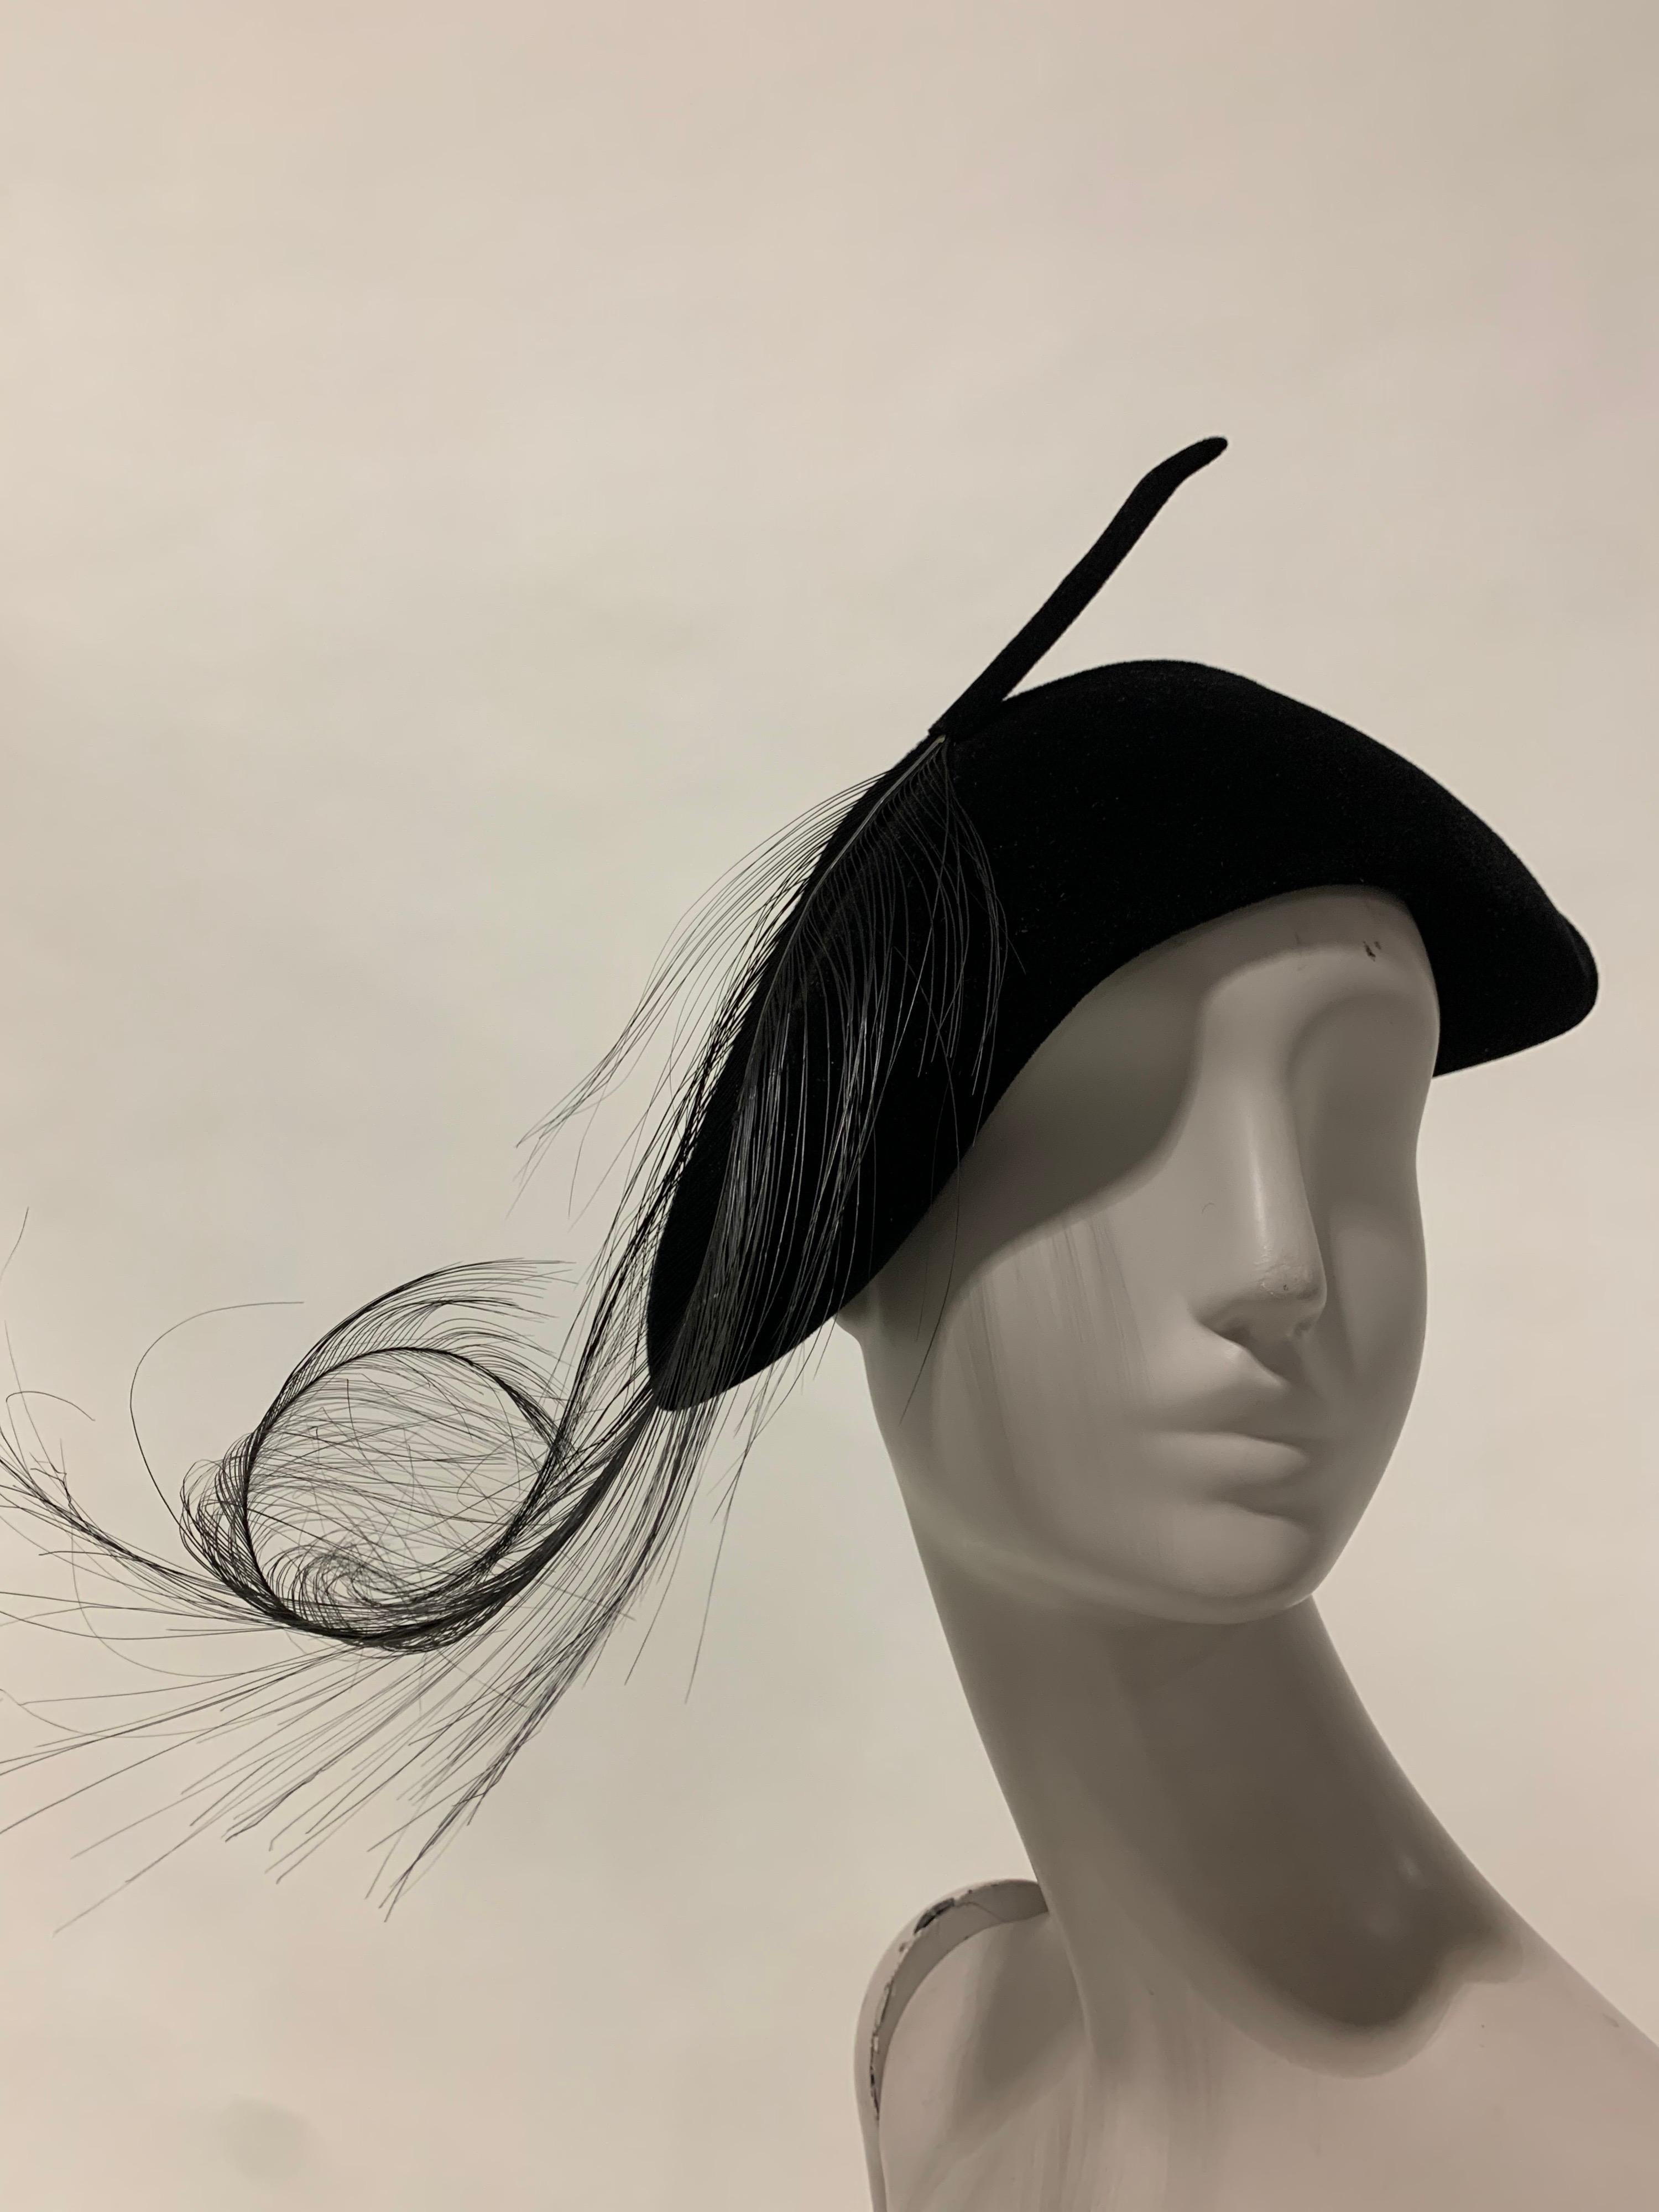 1940s Milgrim Black Cashmere Felt French Style Hat with Singed Feathers. A dramatic Sally Milgrim design with the sculptural appeal of large curled and singed ostrich plumes and pure cashmere felt. Size up to 22.